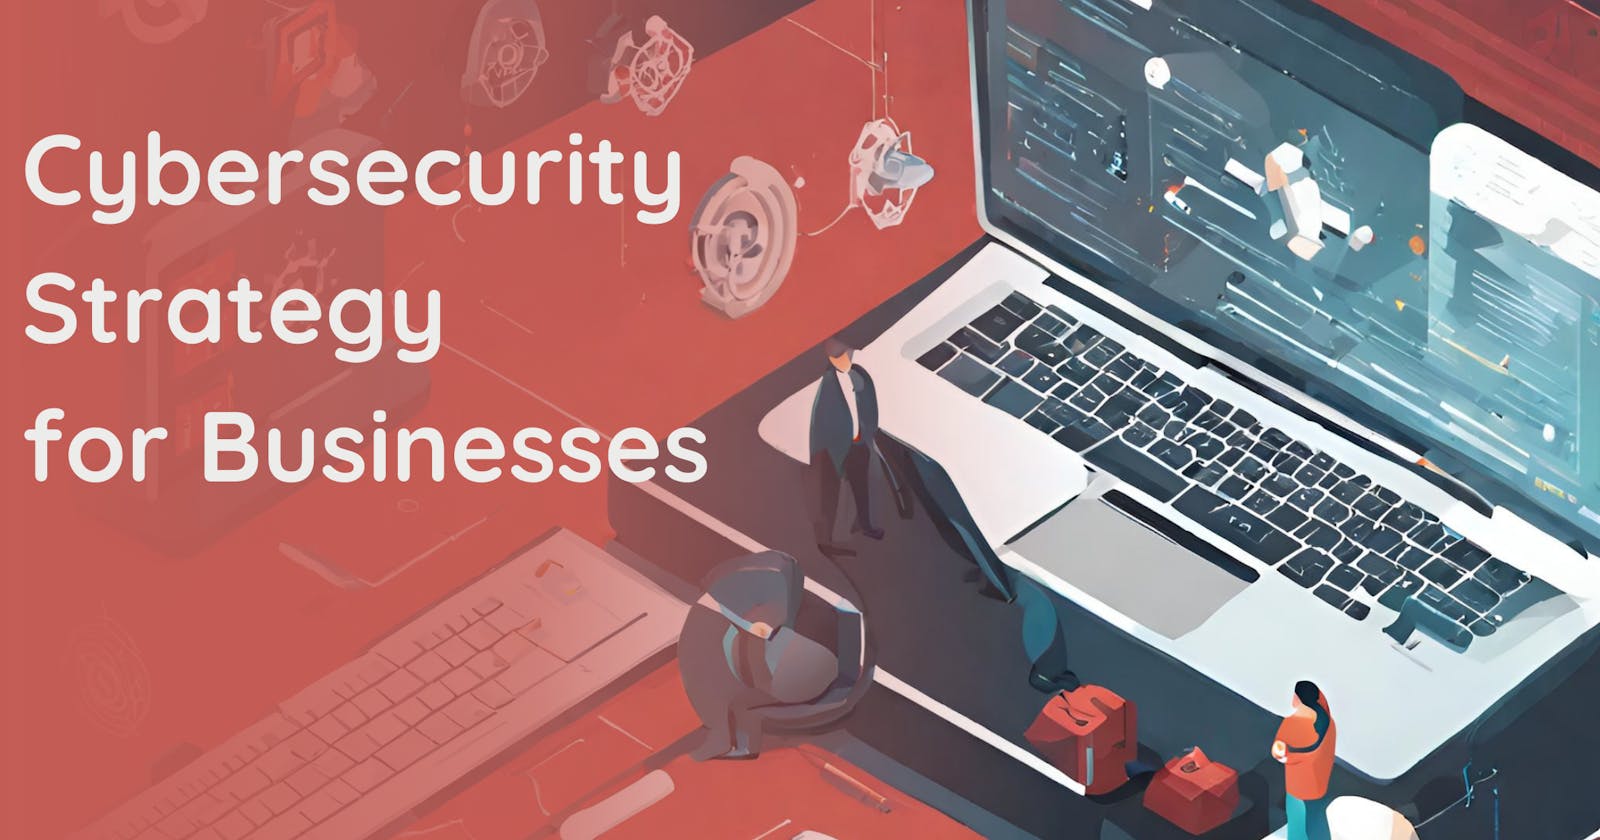 3 Key Areas to Consider When Developing a Cybersecurity Strategy for your Business